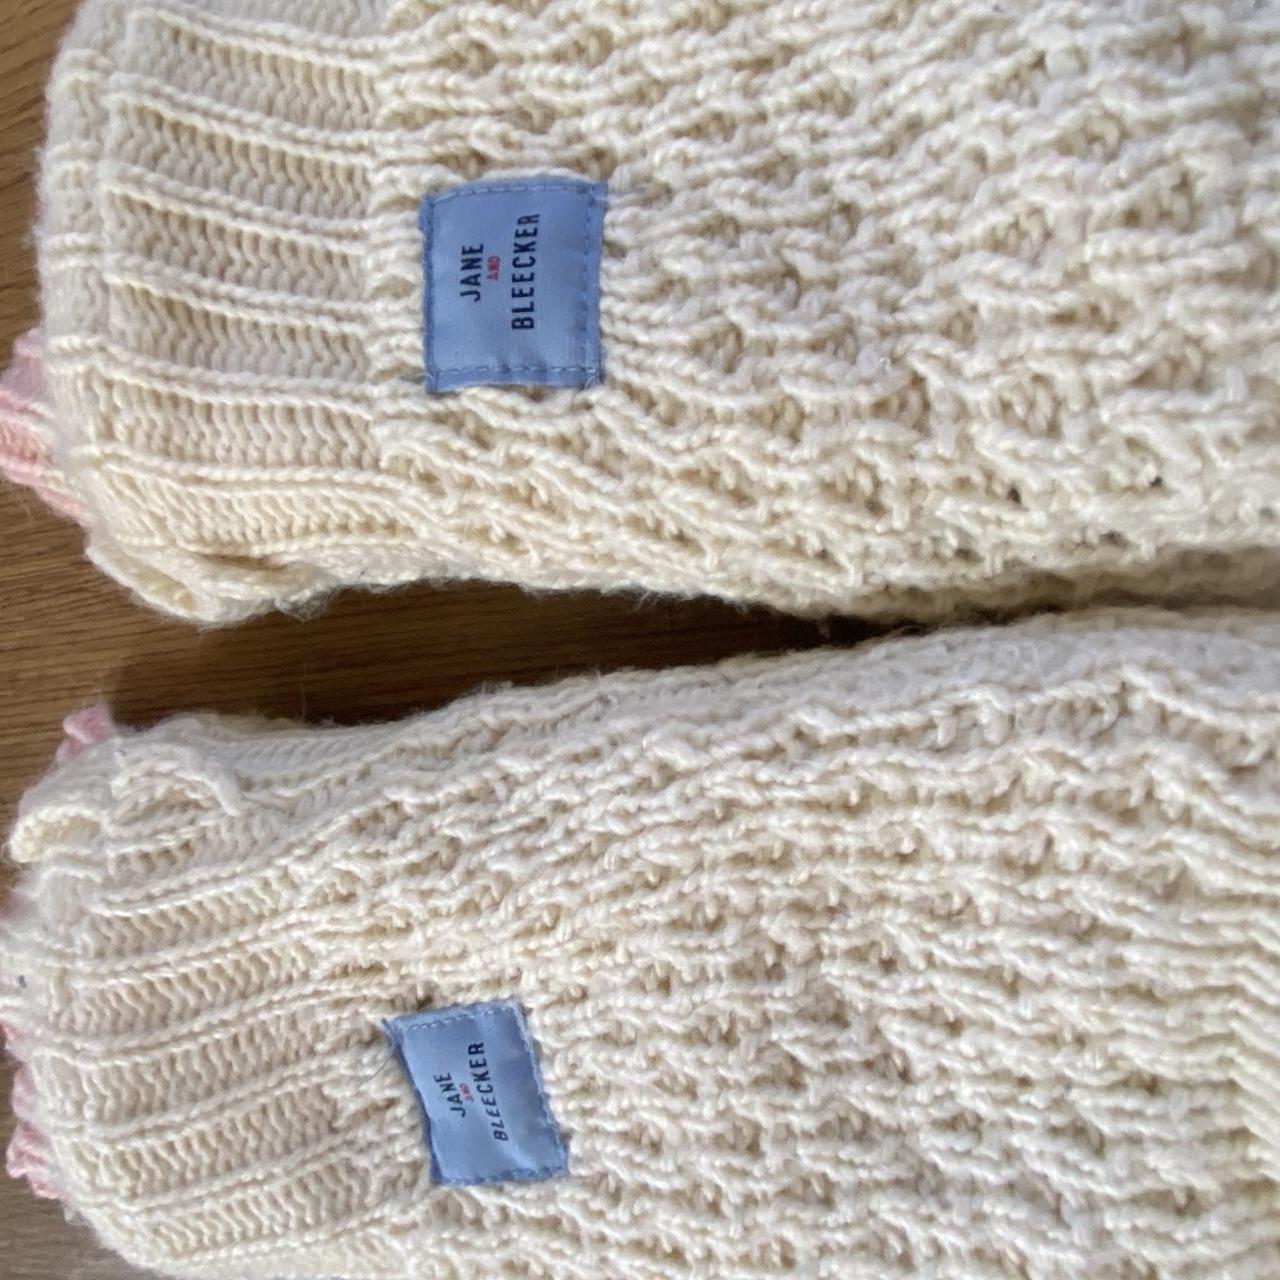 Product Image 2 - Slipper socks. One size. Lined.